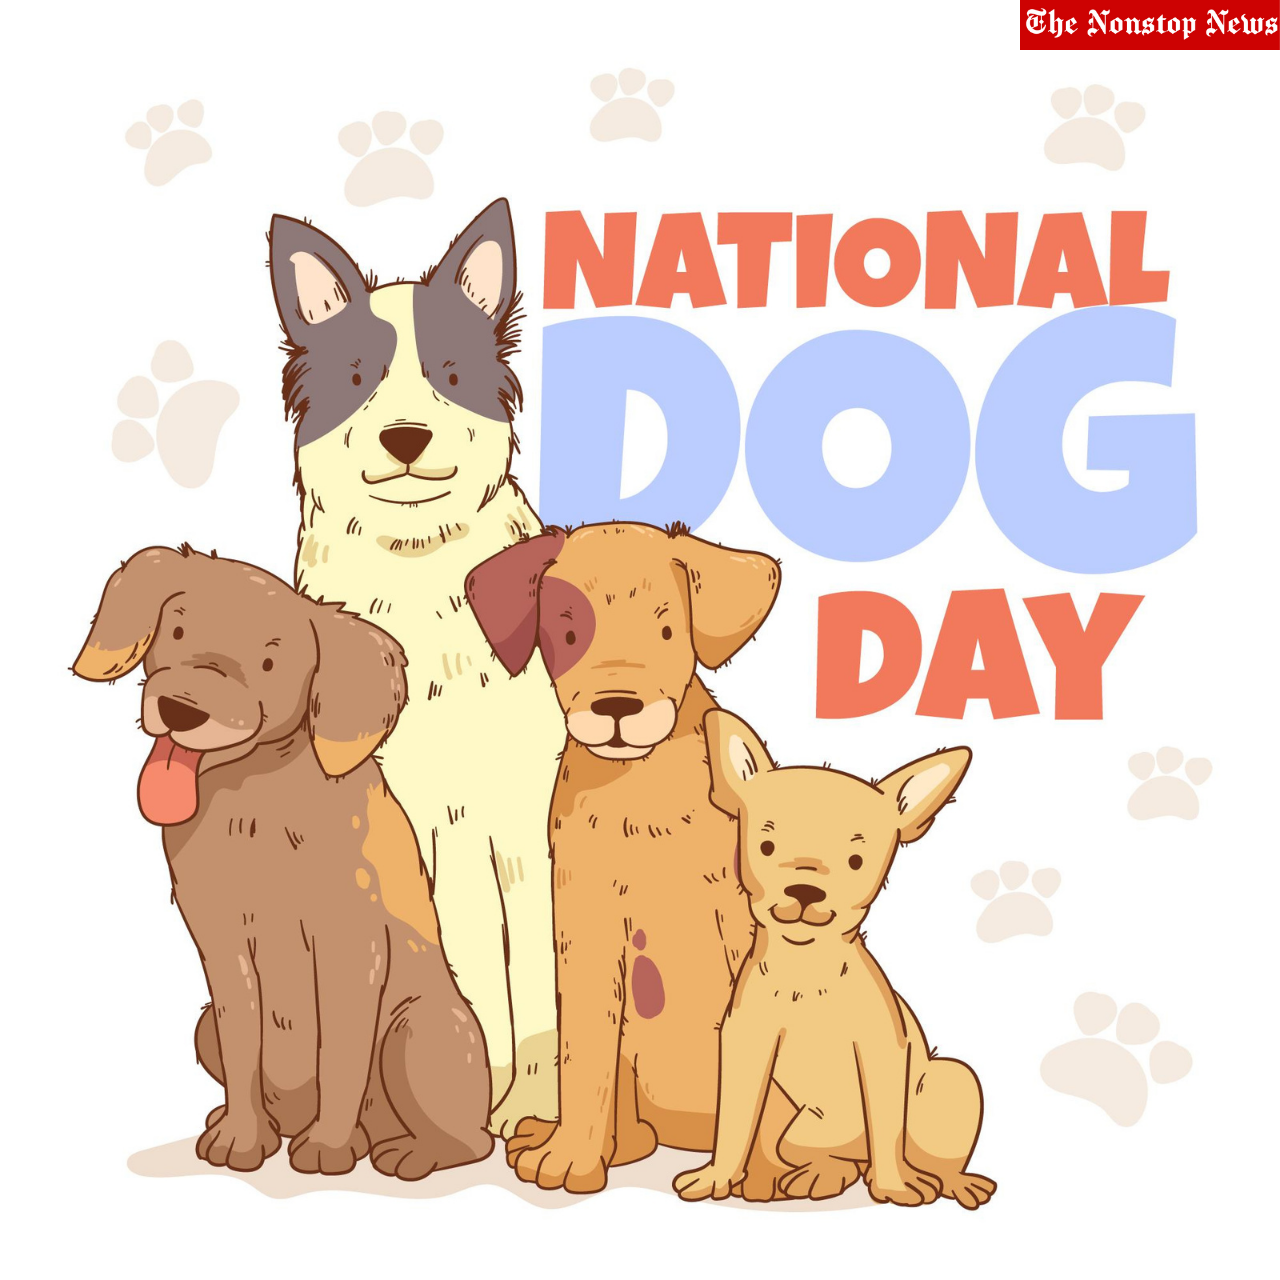 International Dog Day 2021 Theme, Quotes, Images, Instagram Captions, Wishes, Messages, and Best Meme